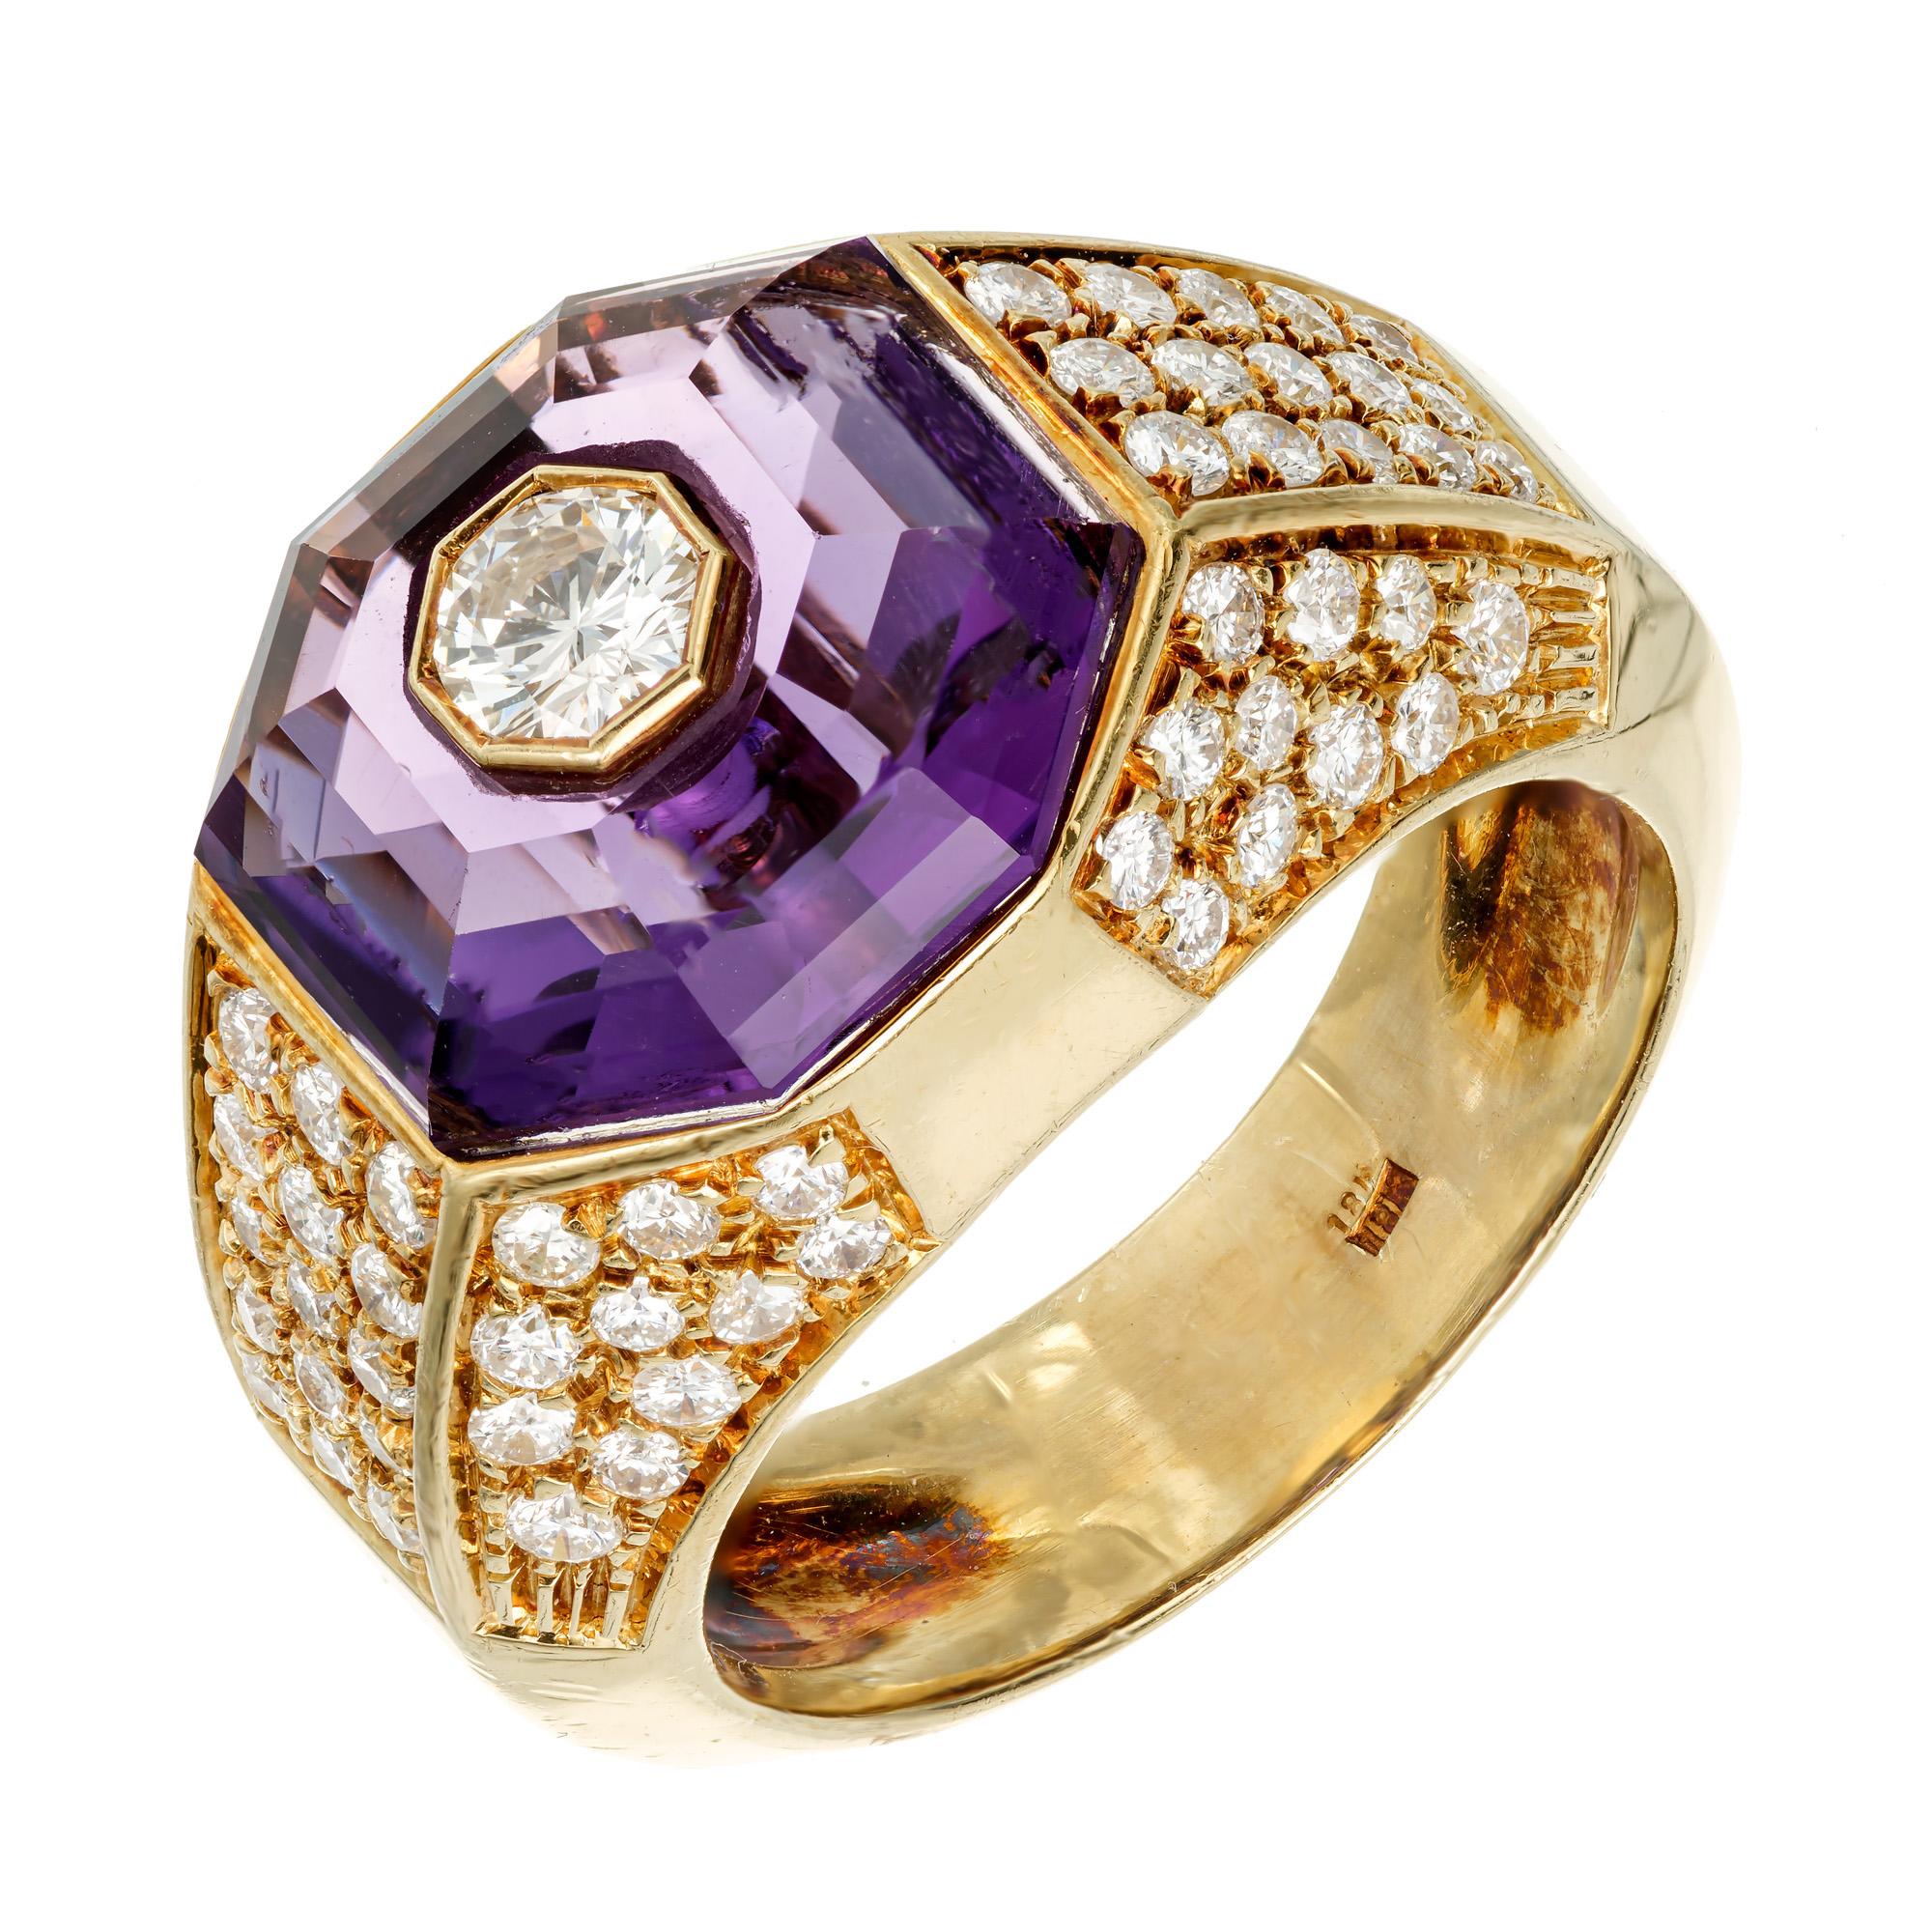 1960's mid-century diamond and amethyst yellow gold ring. .16ct center diamond with a eight sided faceted step cut amethyst halo set in an 18k yellow gold setting with 74 full cut round diamonds.

12 x 12mm genuine 8 sided Amethyst 3.50ct
1